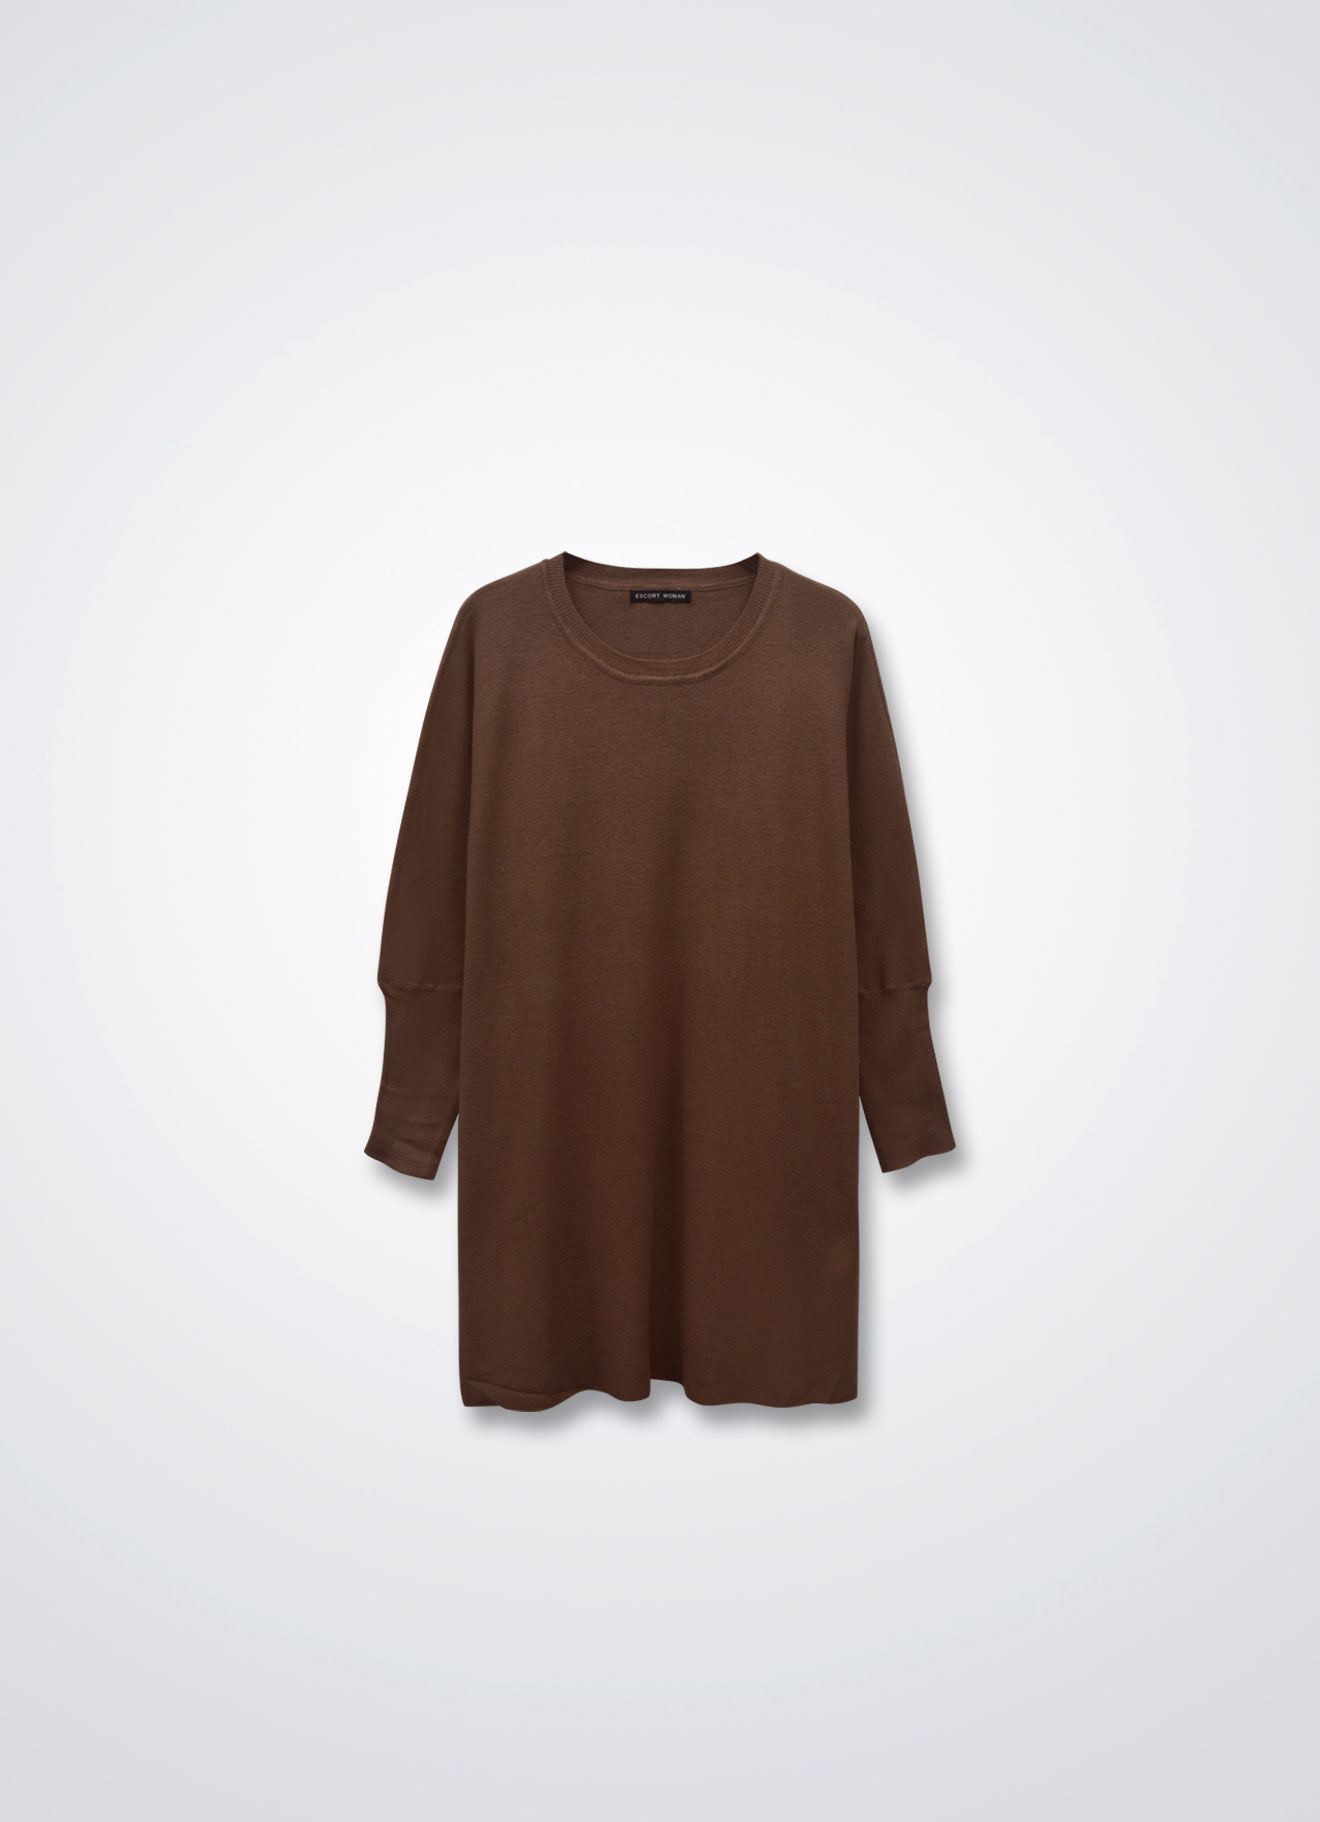 Camel by Blouse